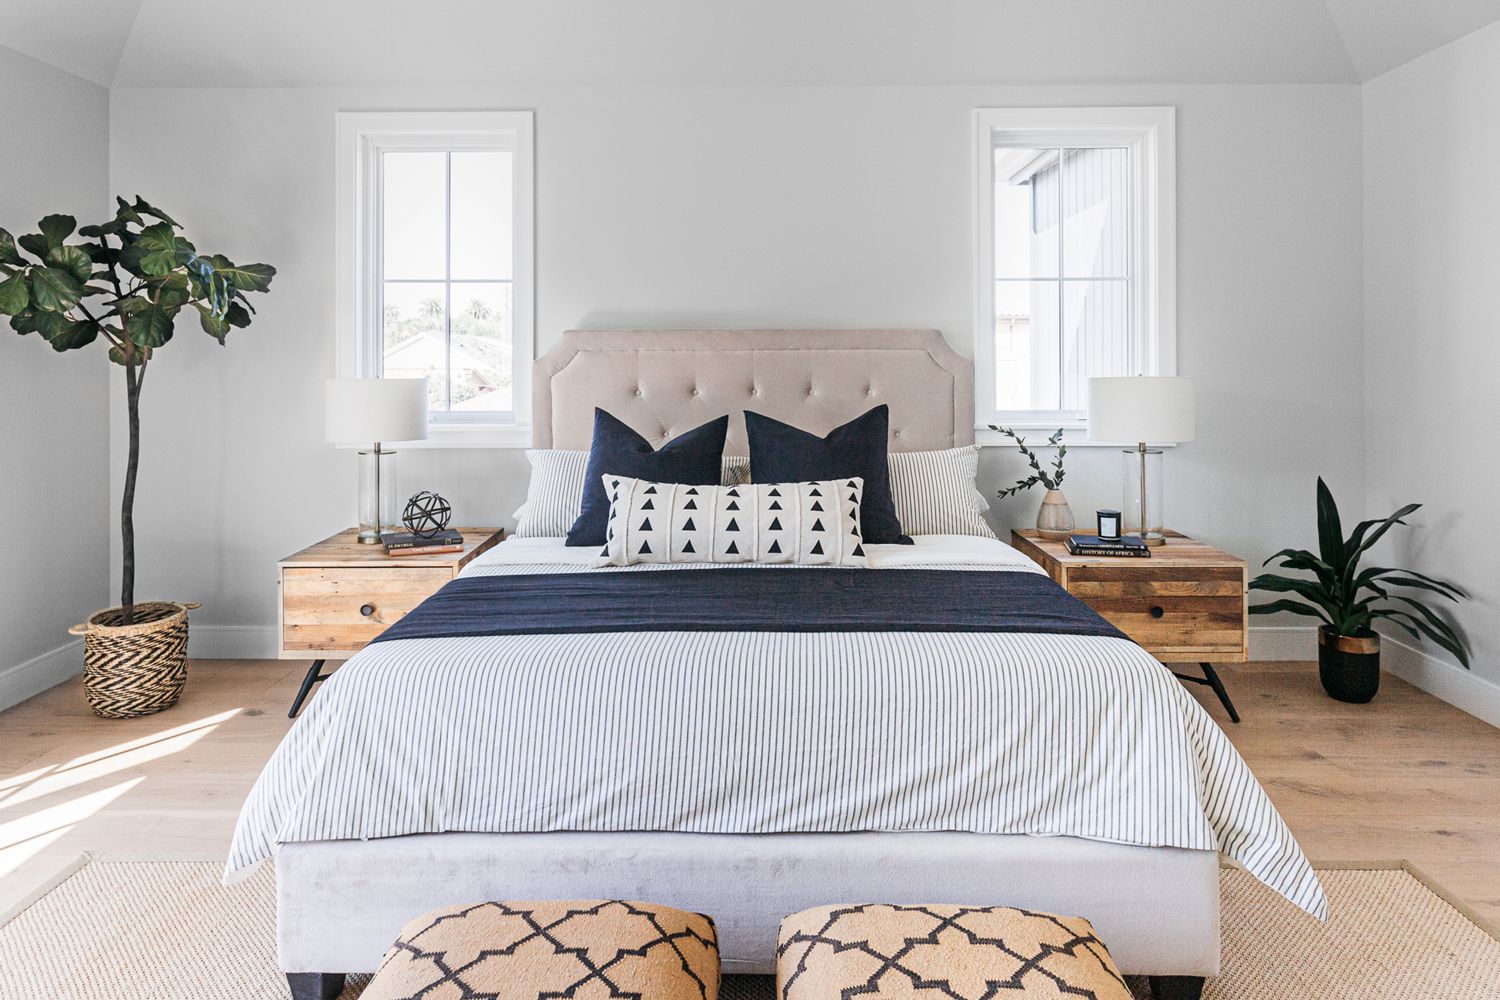 11 Tips to Make a Small Bedroom Look Bigger